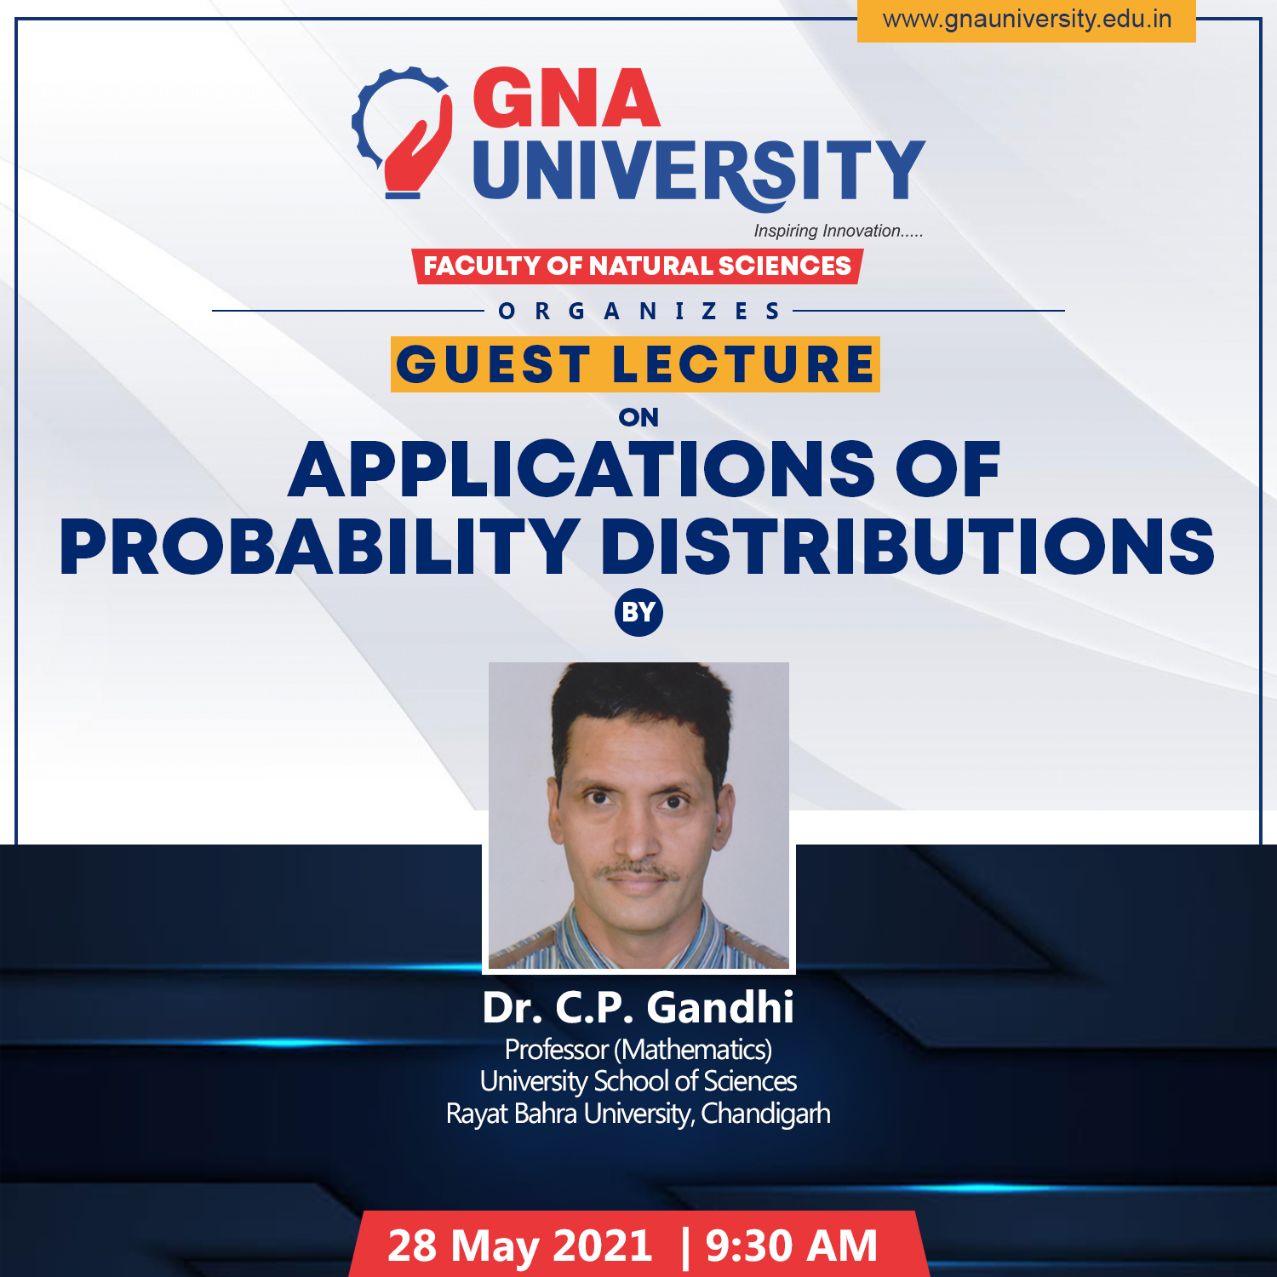 Applications of Probability Distributions